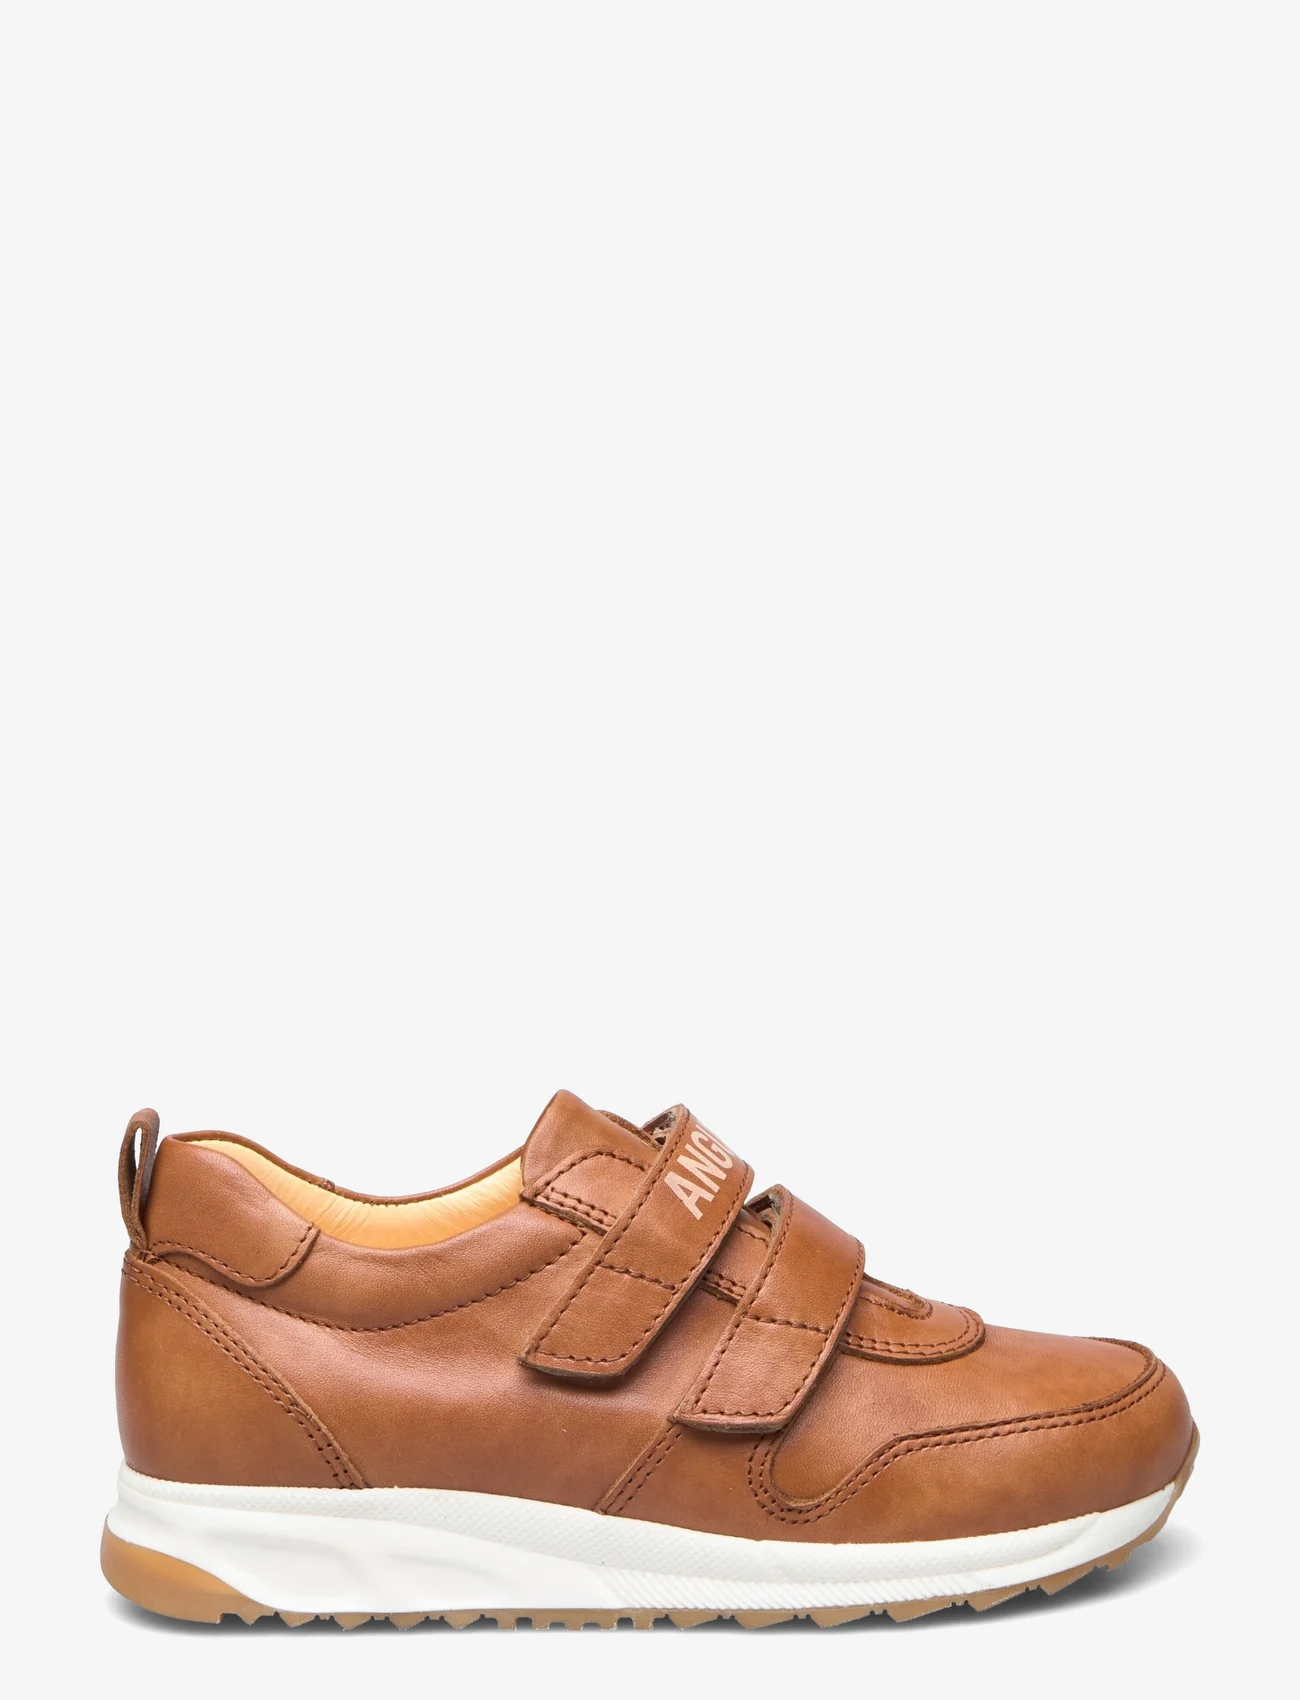 ANGULUS - Shoes - flat - with velcro - sommerschnäppchen - 1789 tan - 1